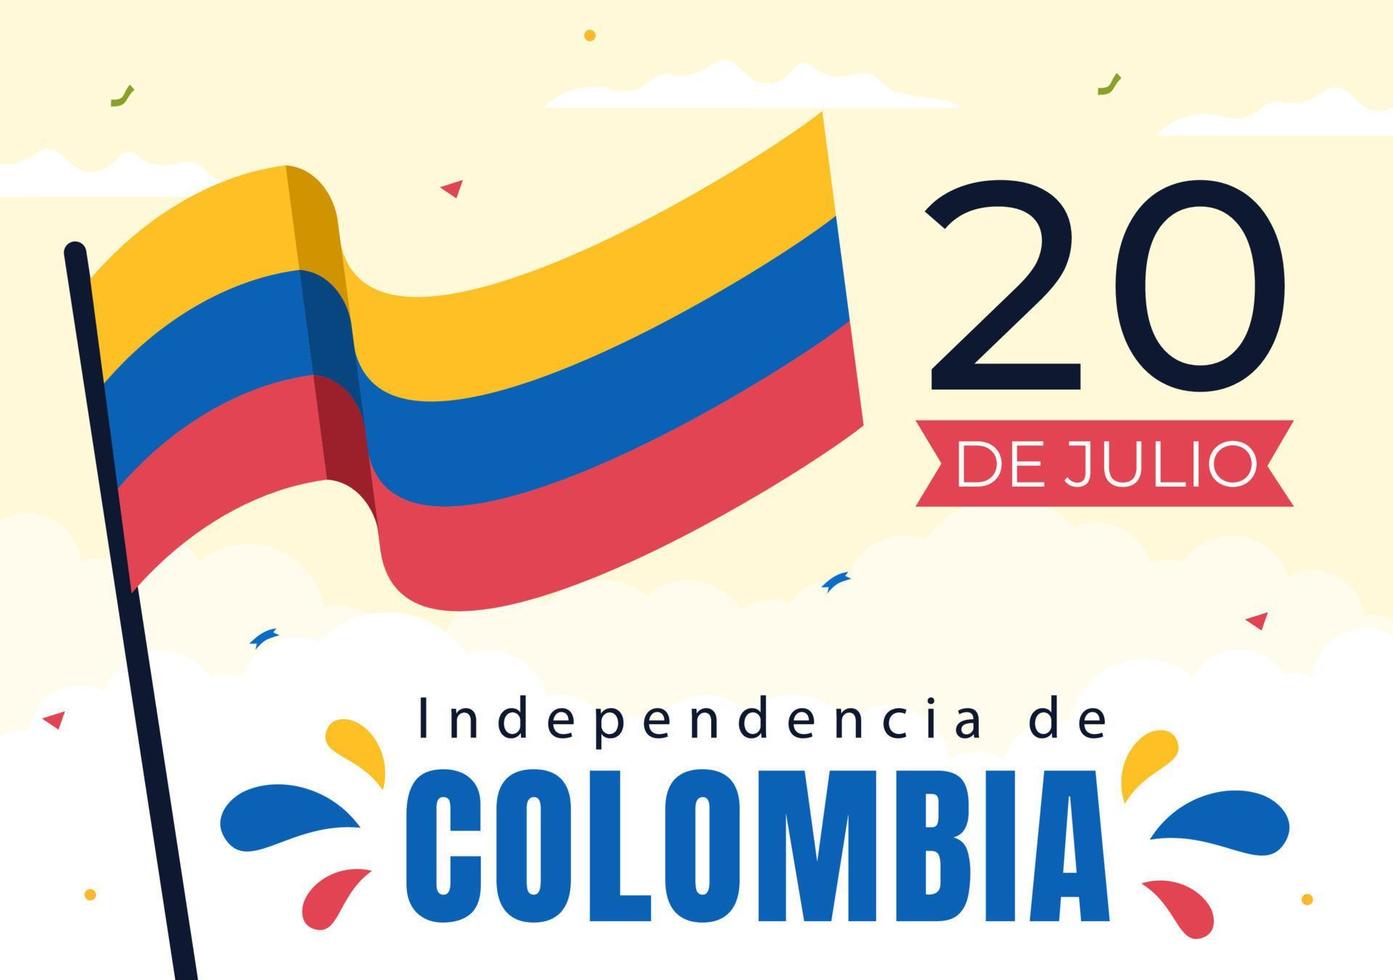 20 De Julio independencia De Colombia Cartoon Illustration with Flags and Balloons for Poster Style Design vector